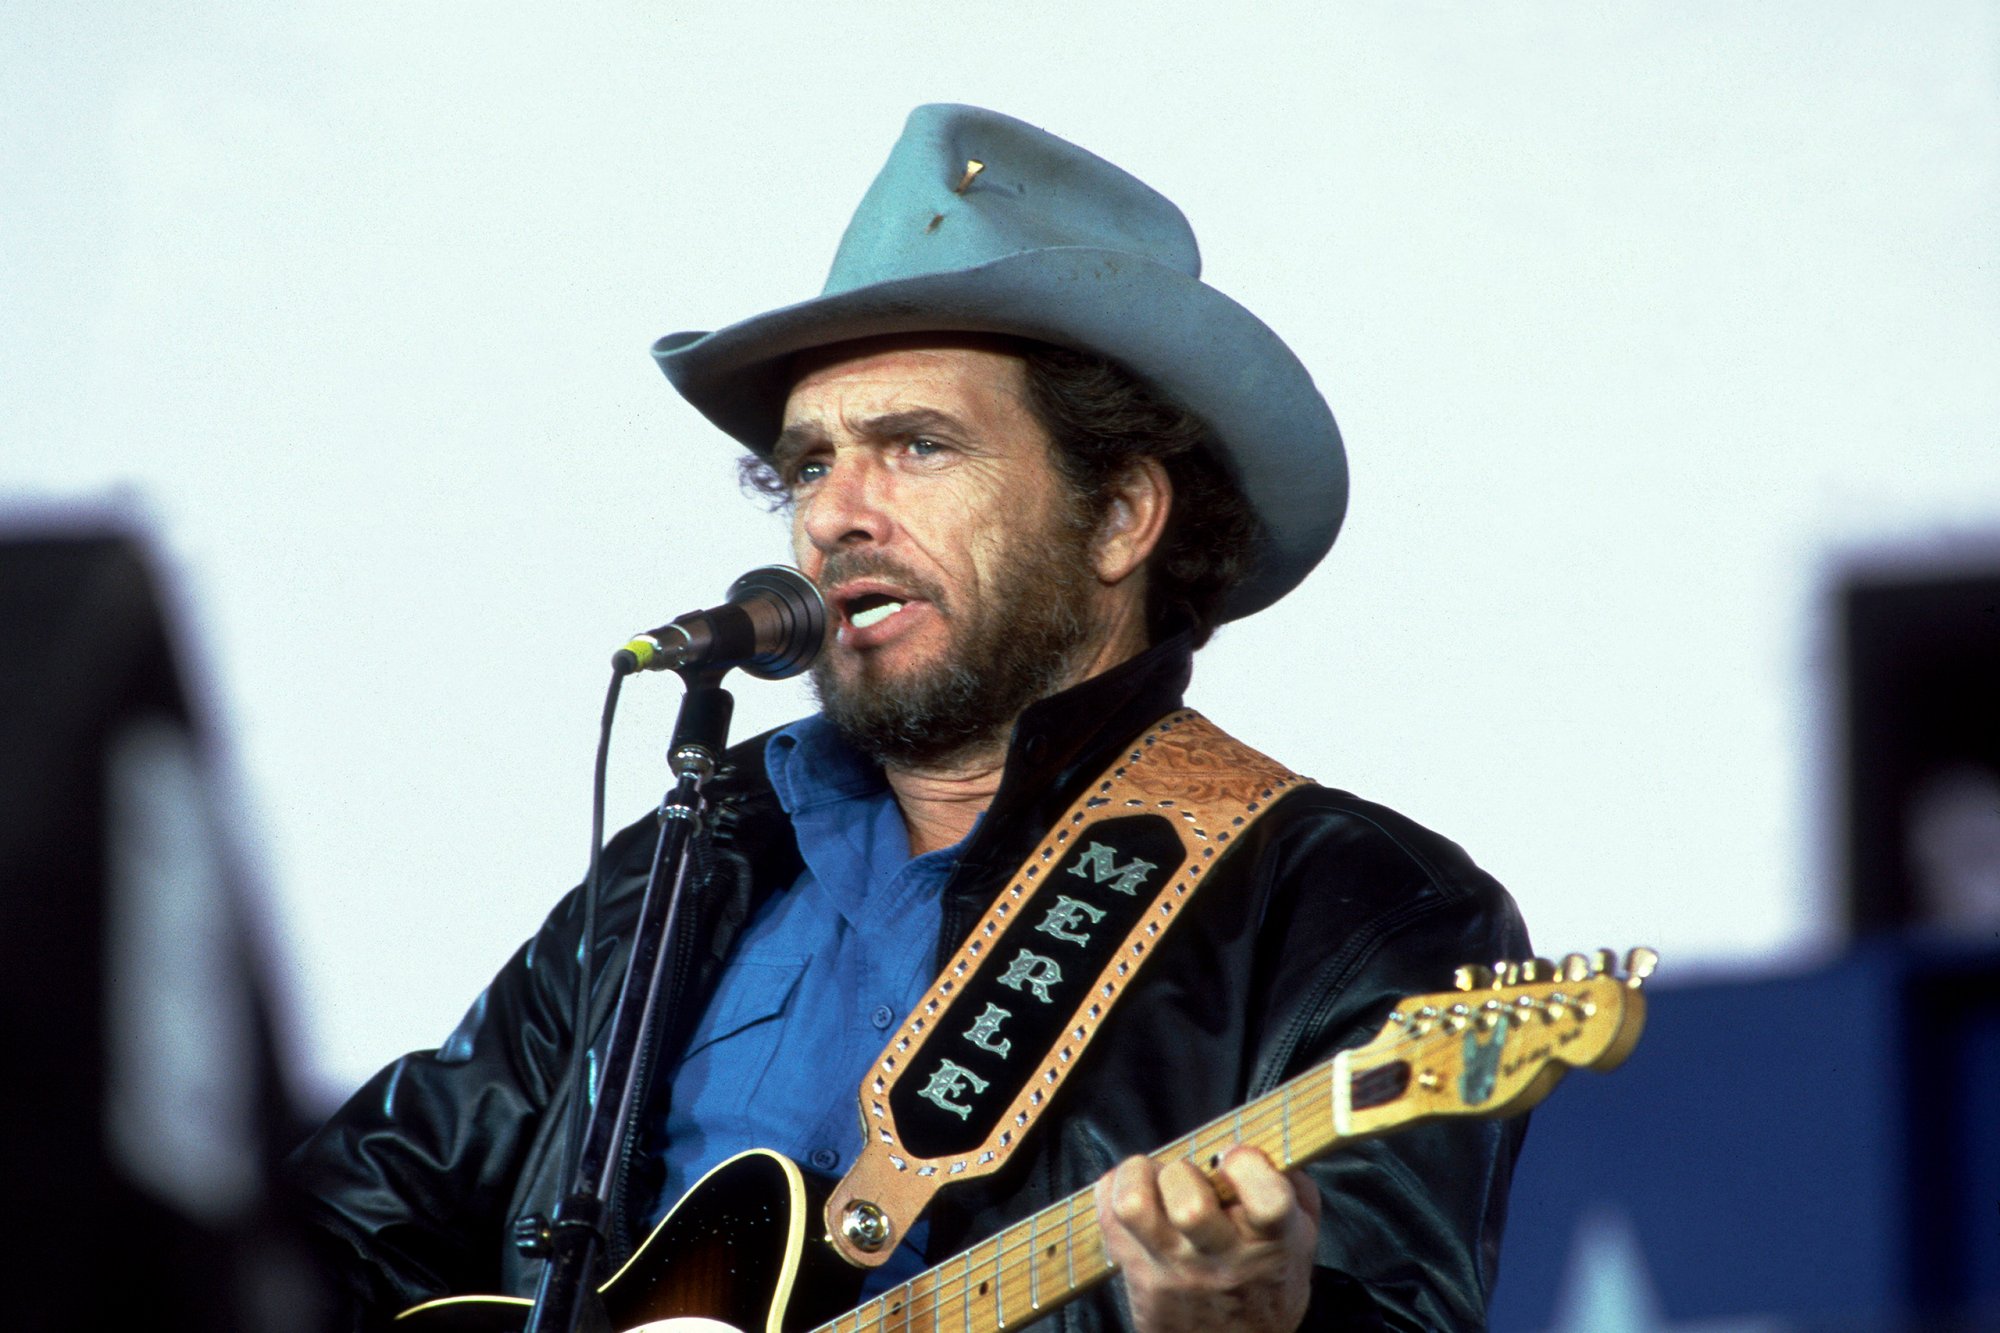 Merle Haggard Backgrounds, Compatible - PC, Mobile, Gadgets| 2000x1333 px